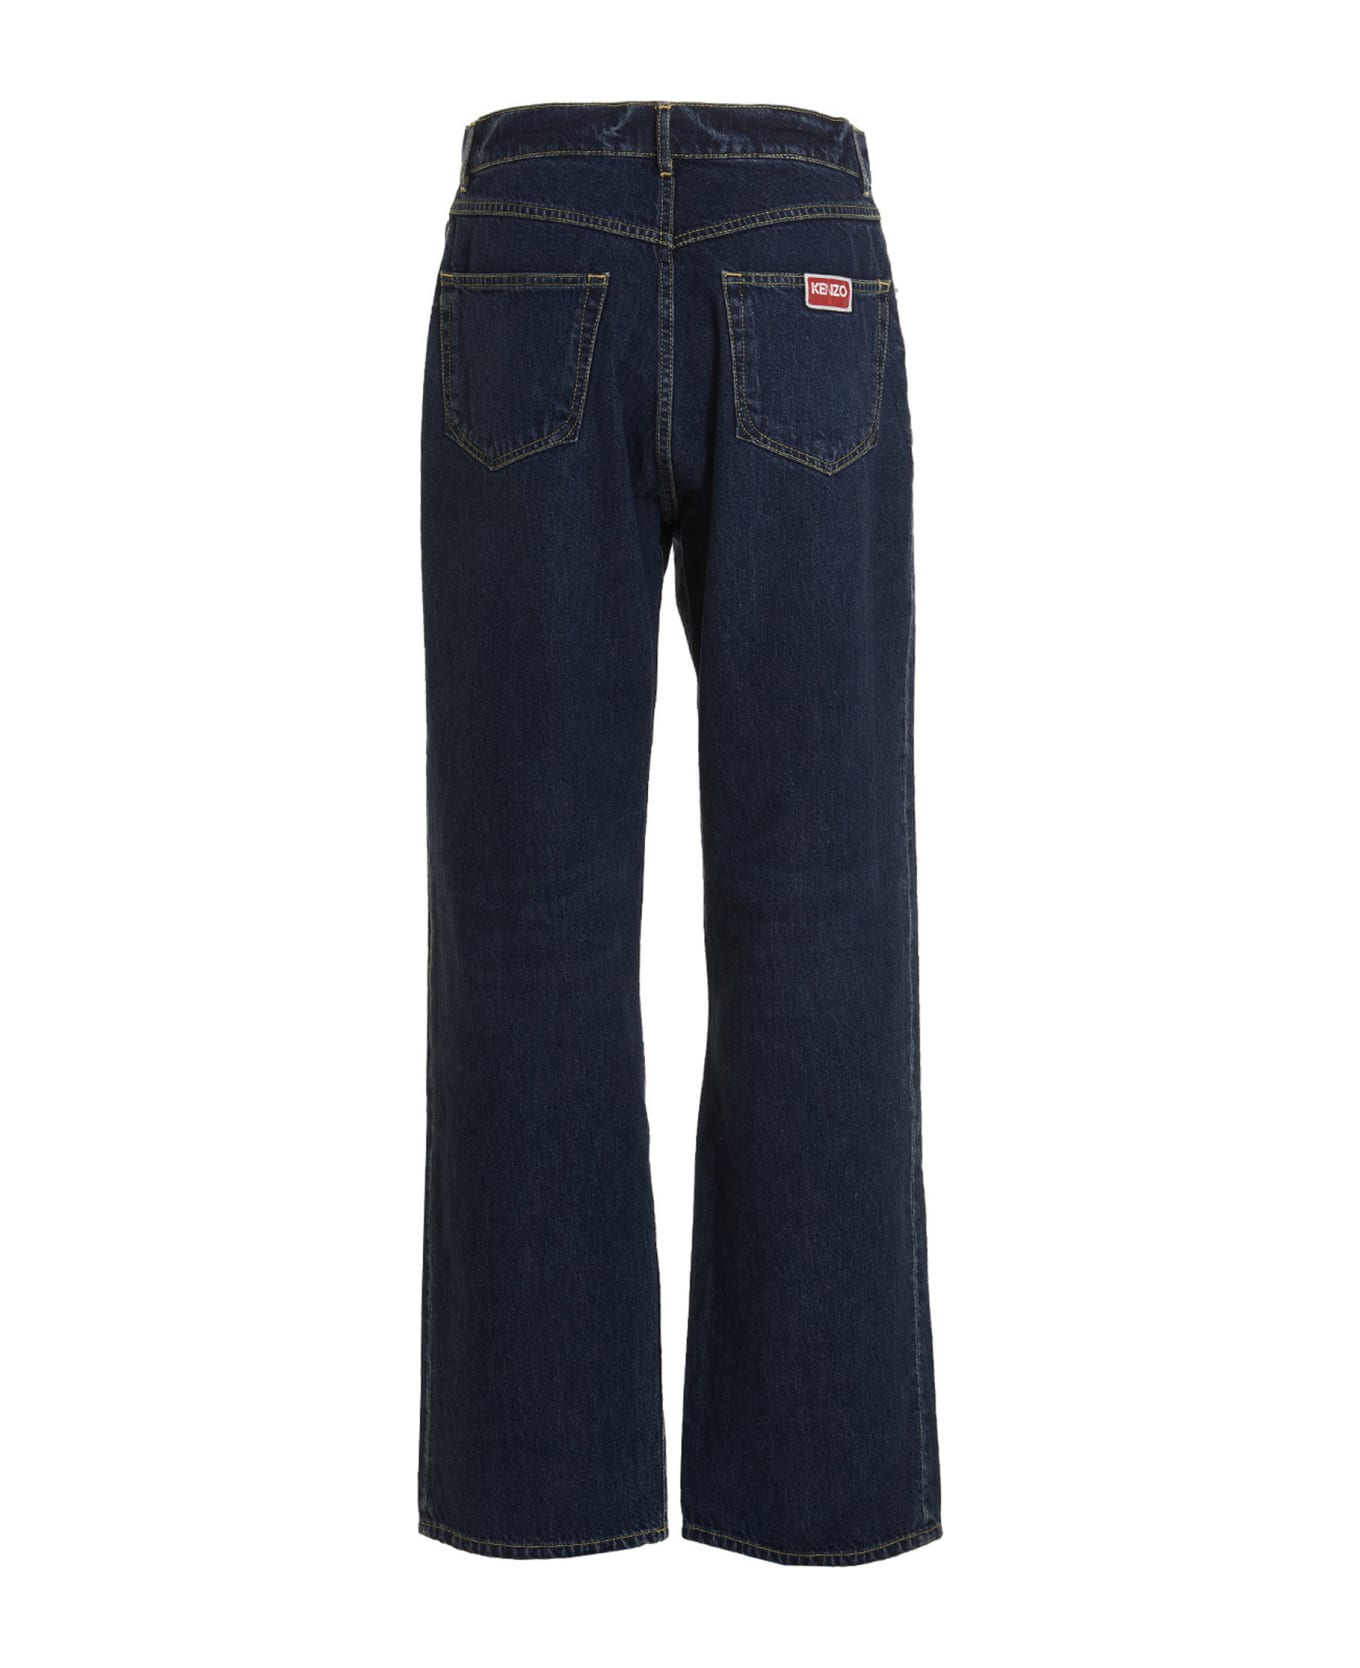 Kenzo Relaxed Fit Jeans - BLUE